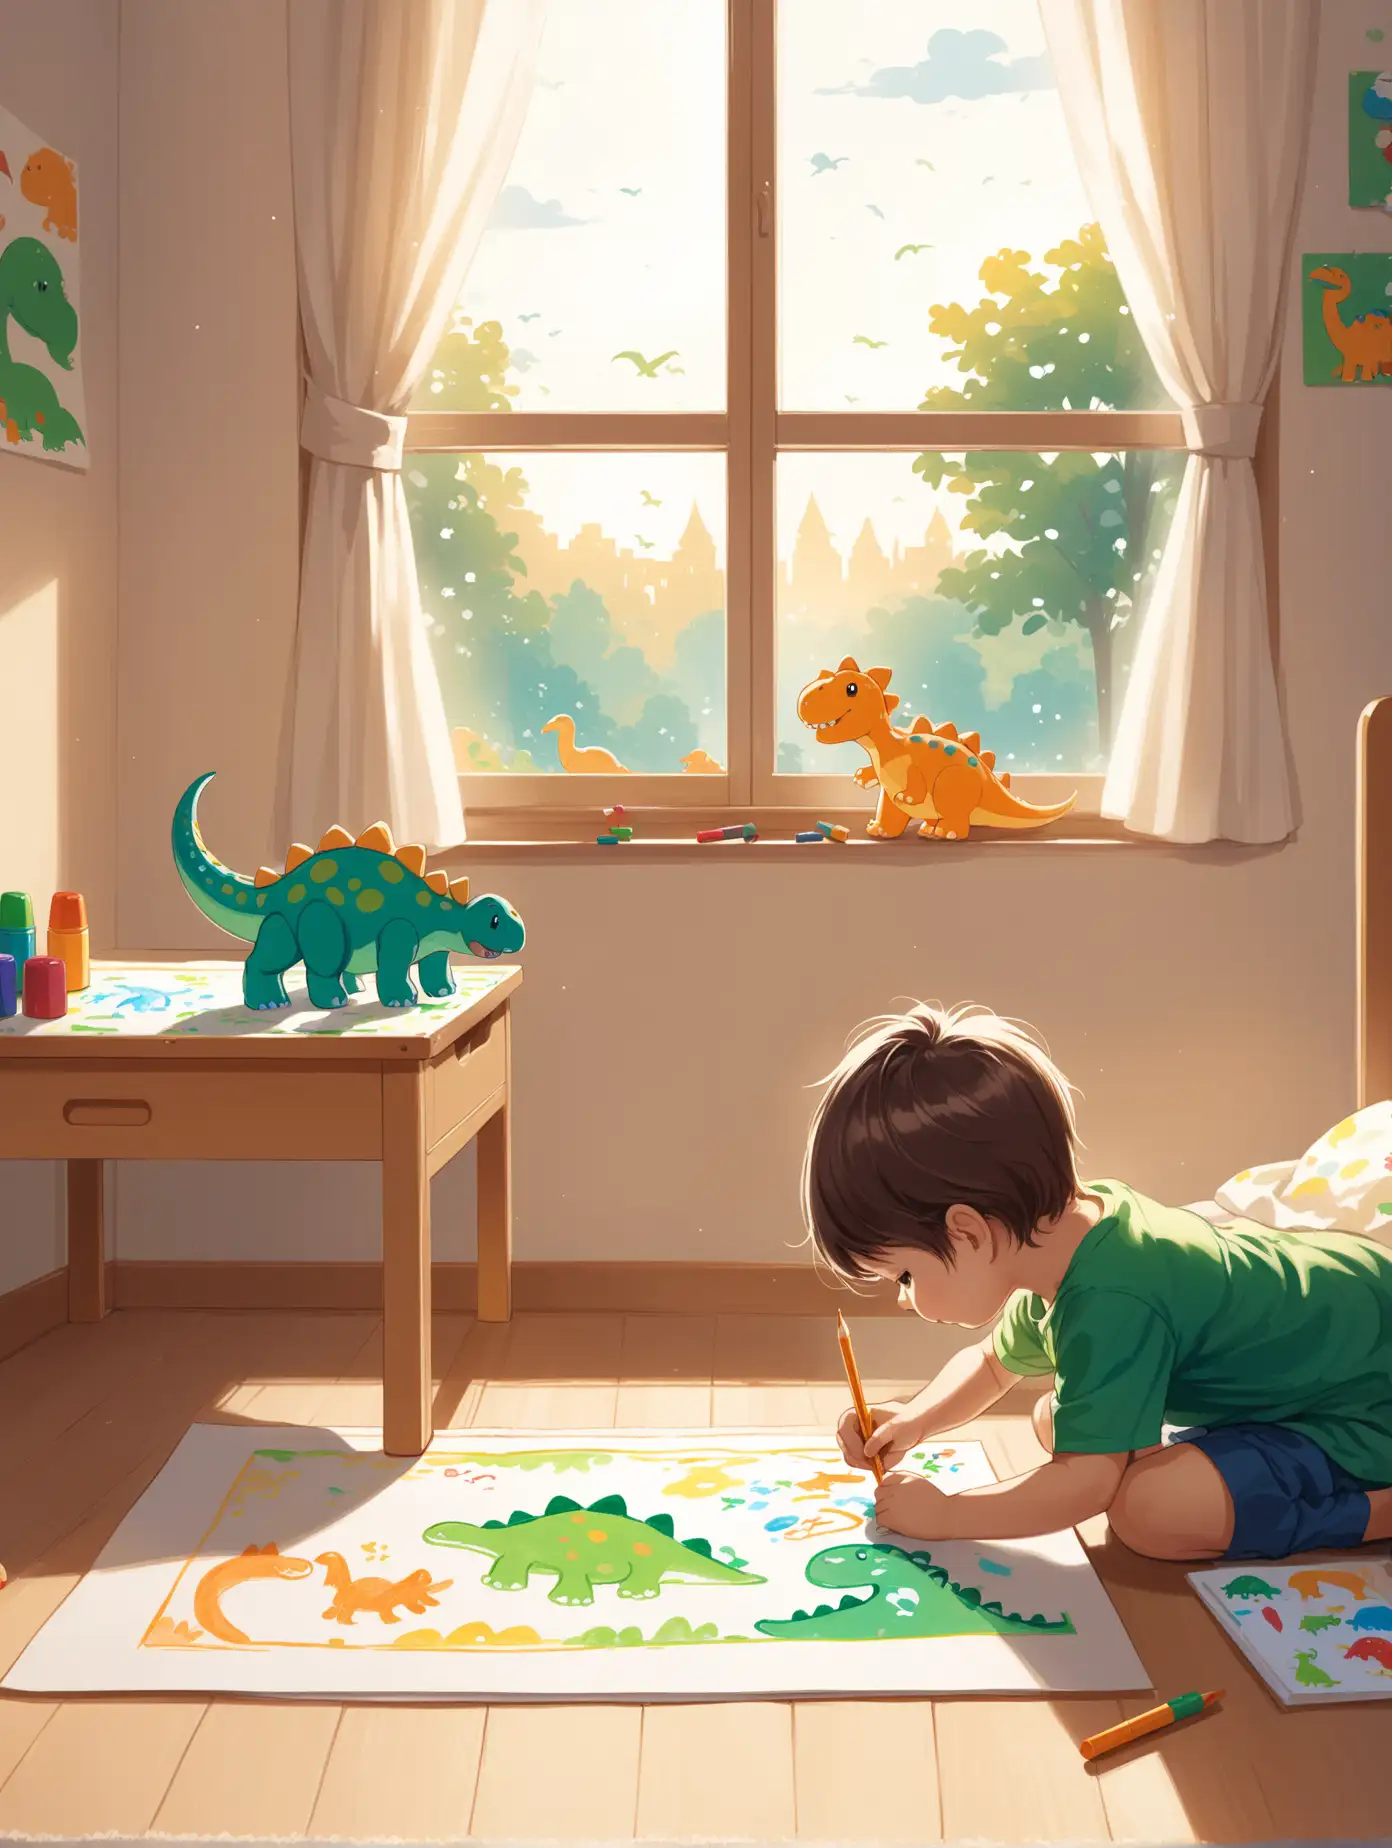 child drawing in his room, in the scene we see his bed in the background and the window, the child is 5 years old and is drawing on the floor a dinosaur